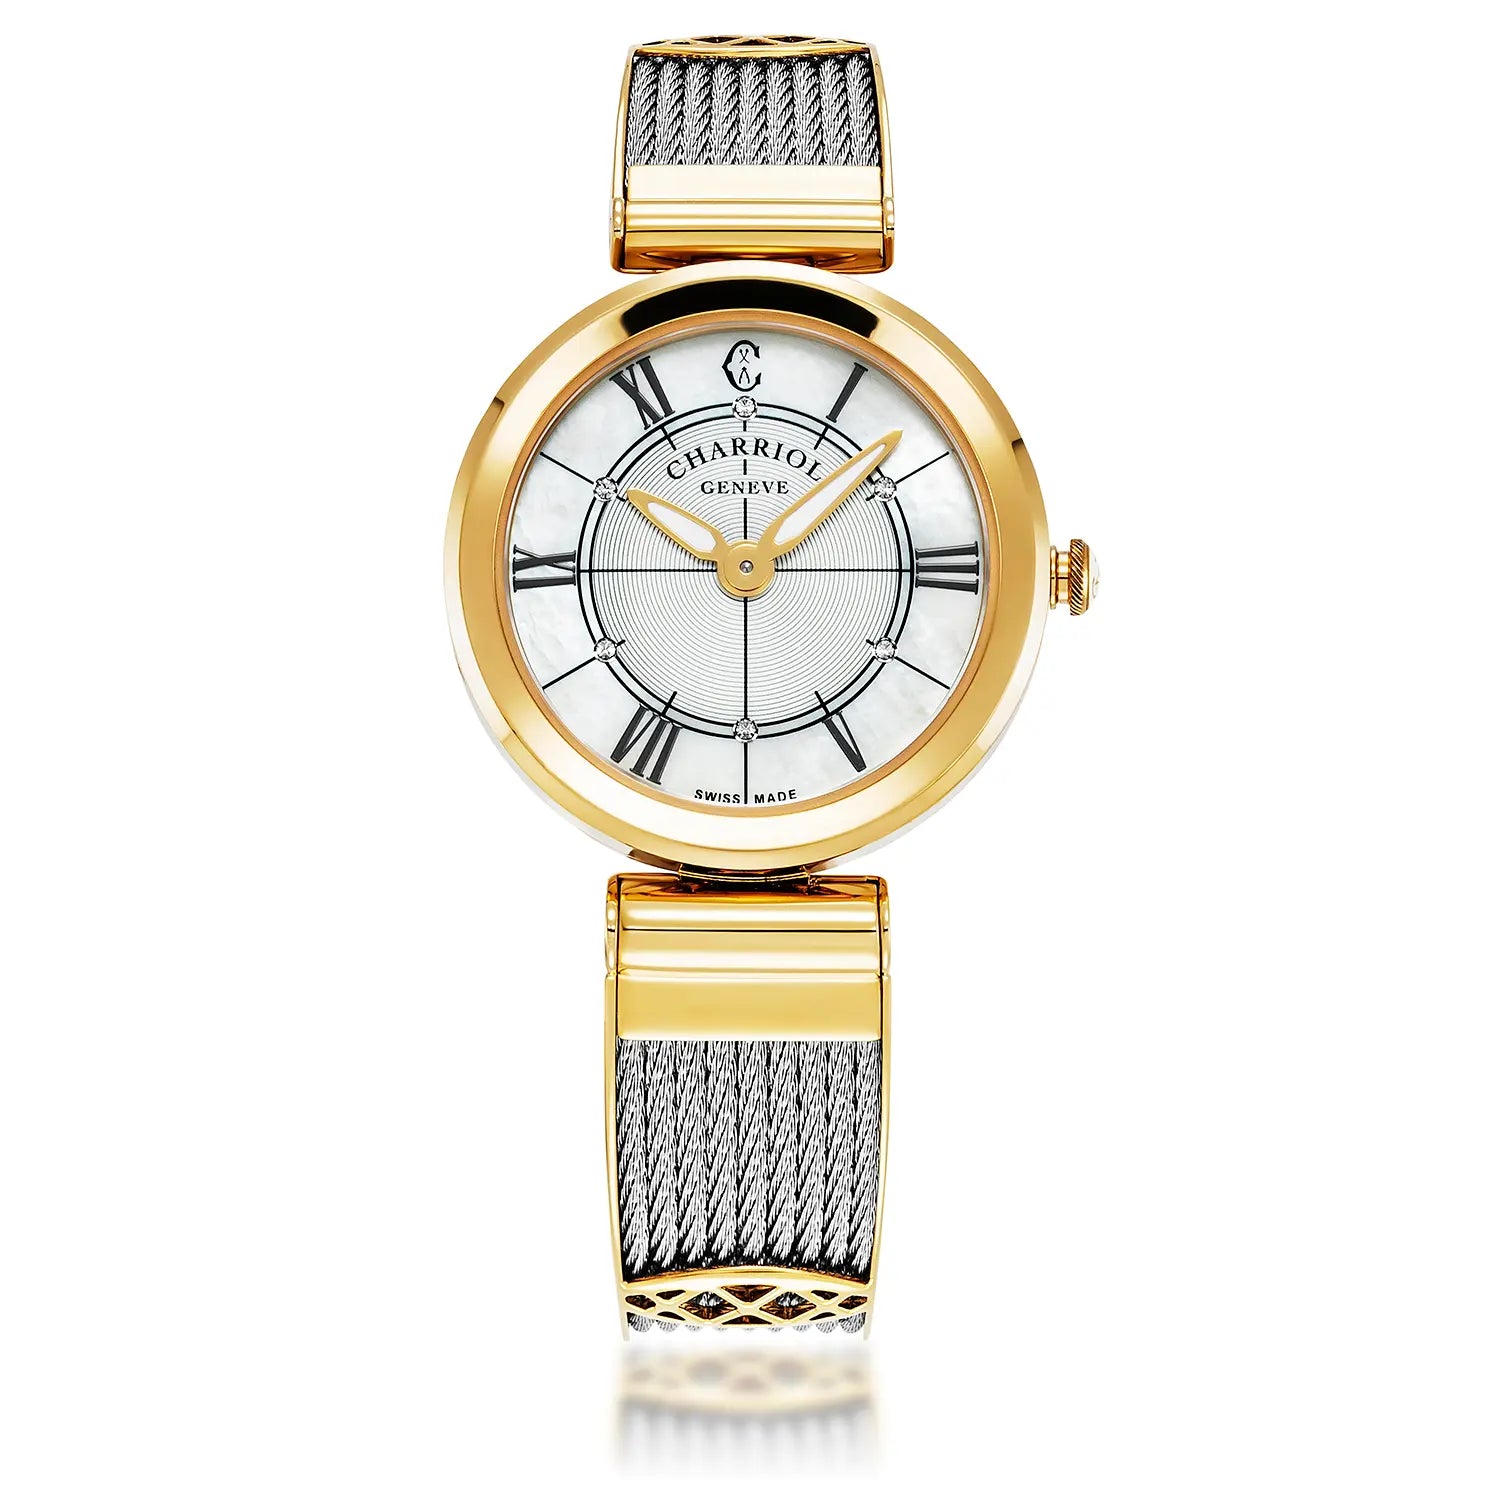 FOREVER, 32MM, QUARTZ CALIBRE, MOTHER-OF-PEARL DIAL, YELLOW GOLD PVD BEZEL, STEEL CABLE BRACELET